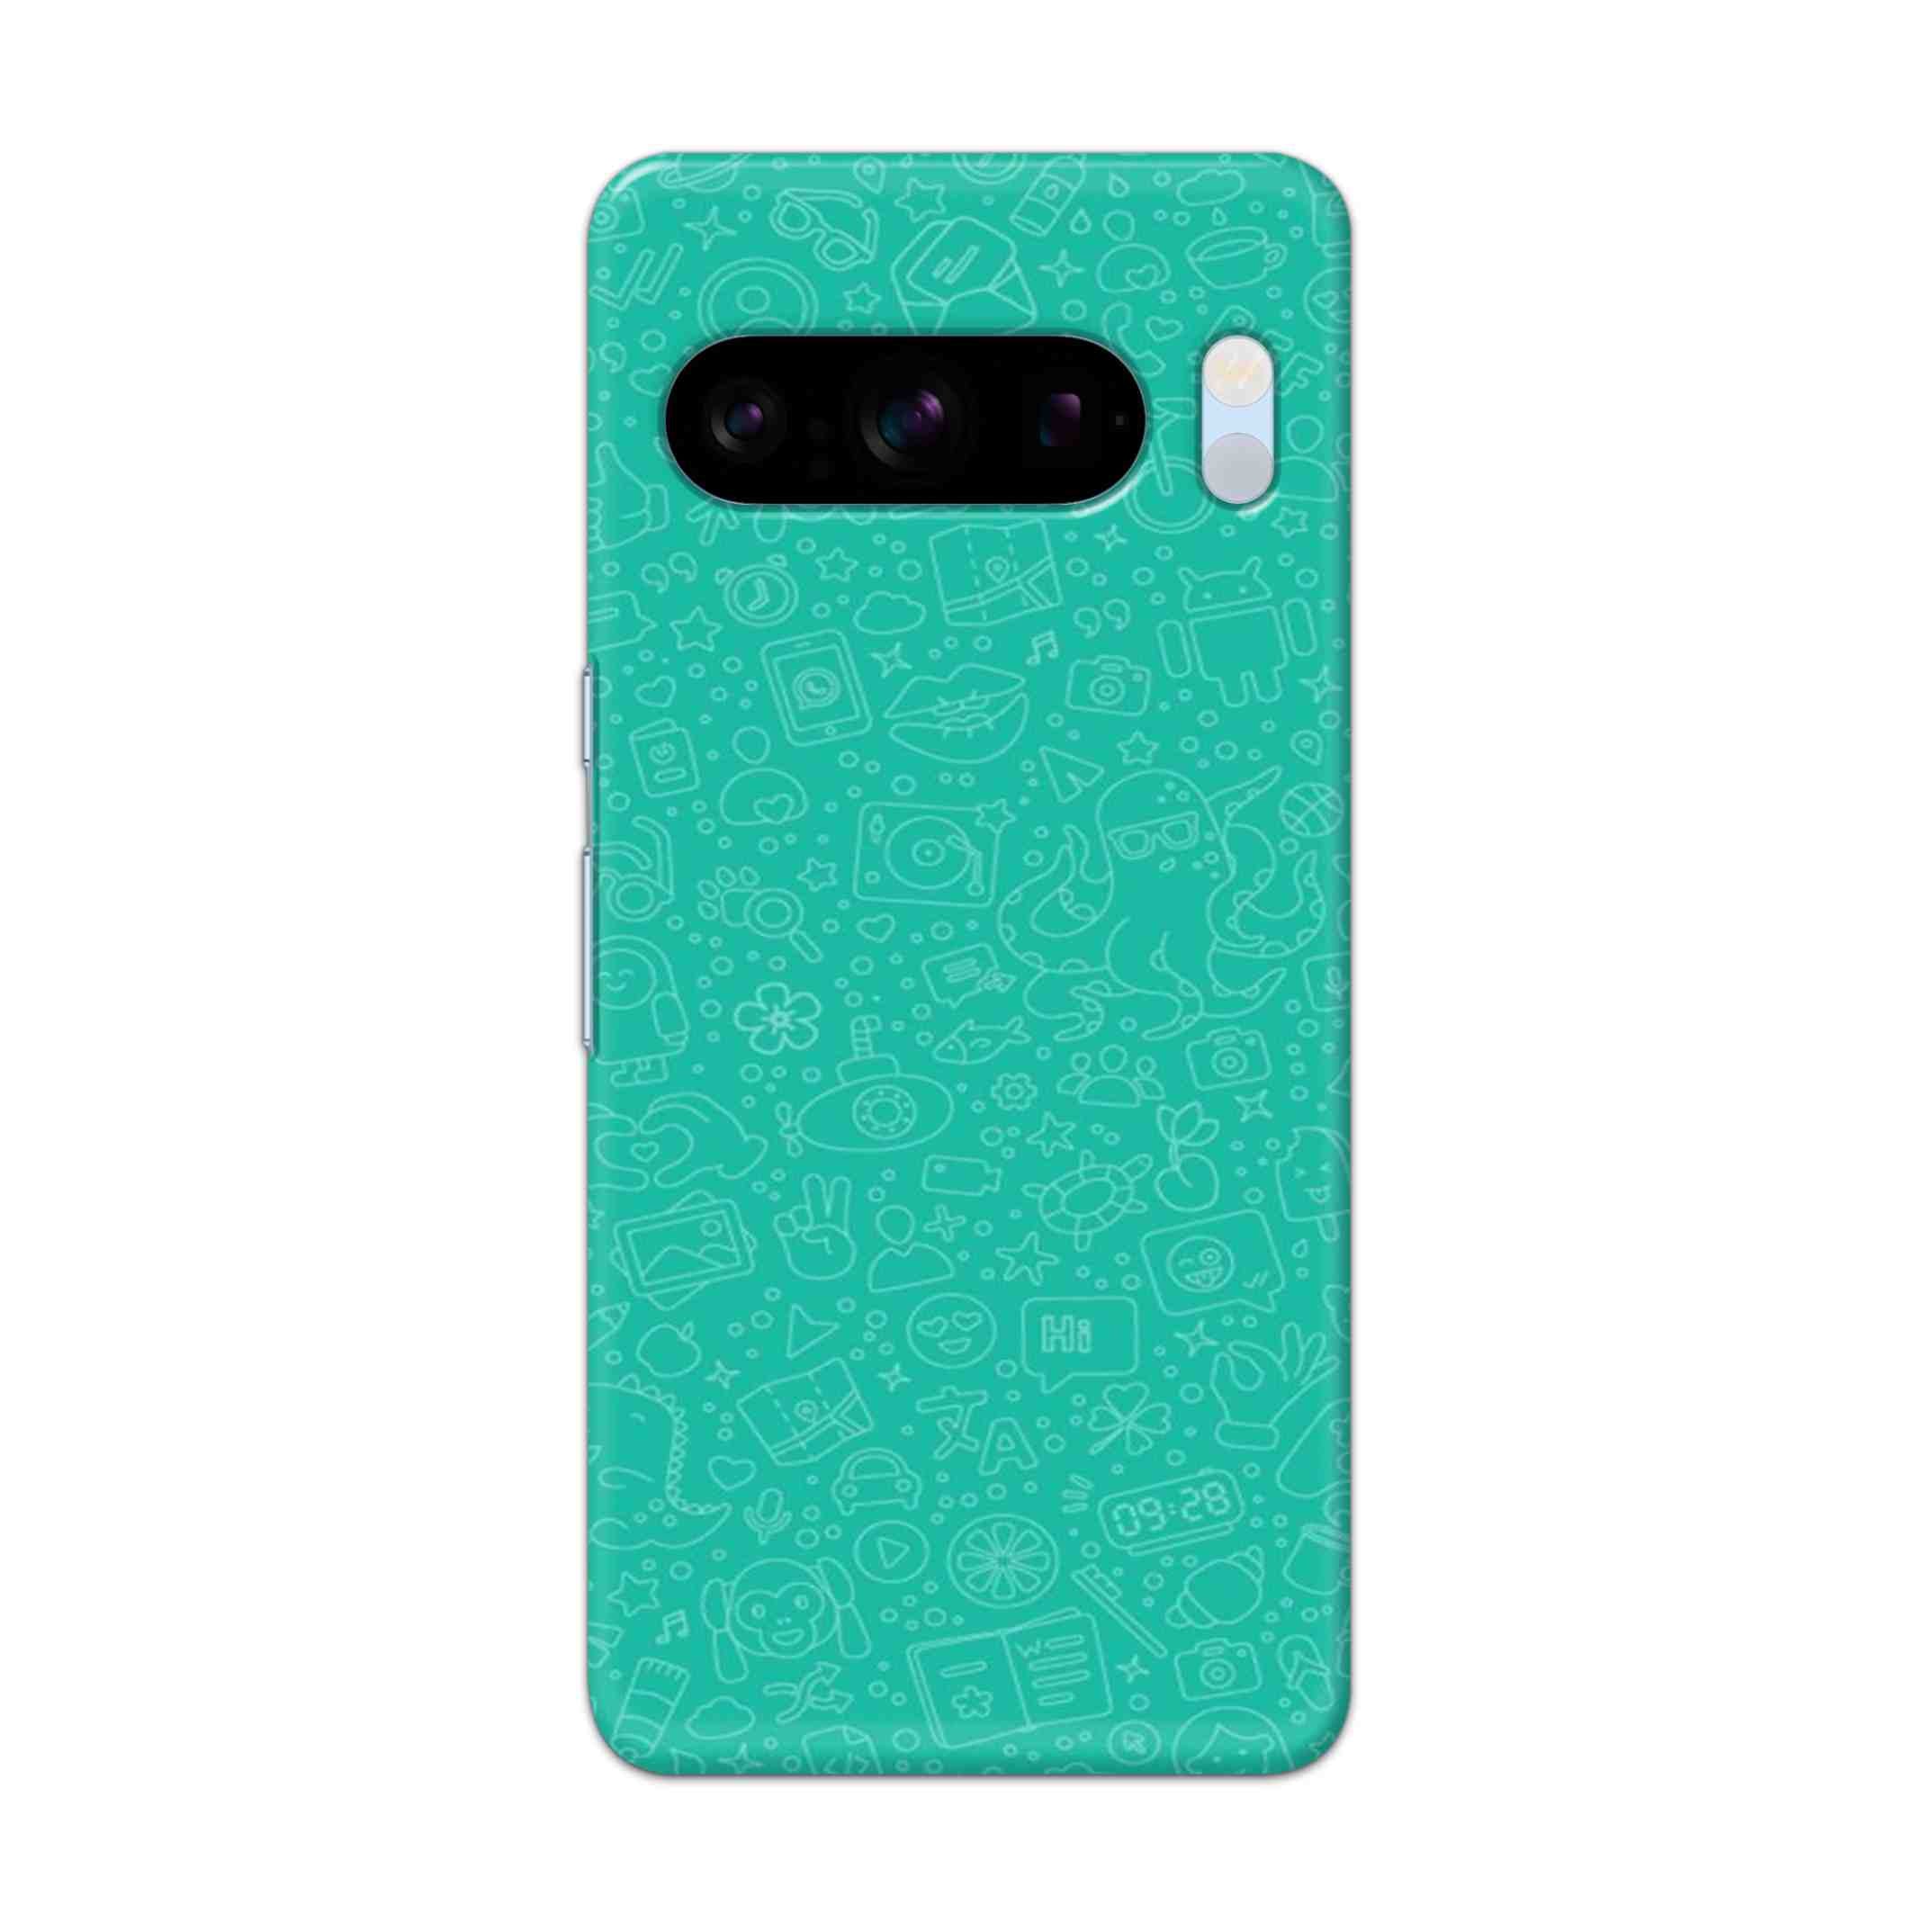 Buy Whatsapp Hard Back Mobile Phone Case/Cover For Pixel 8 Pro Online